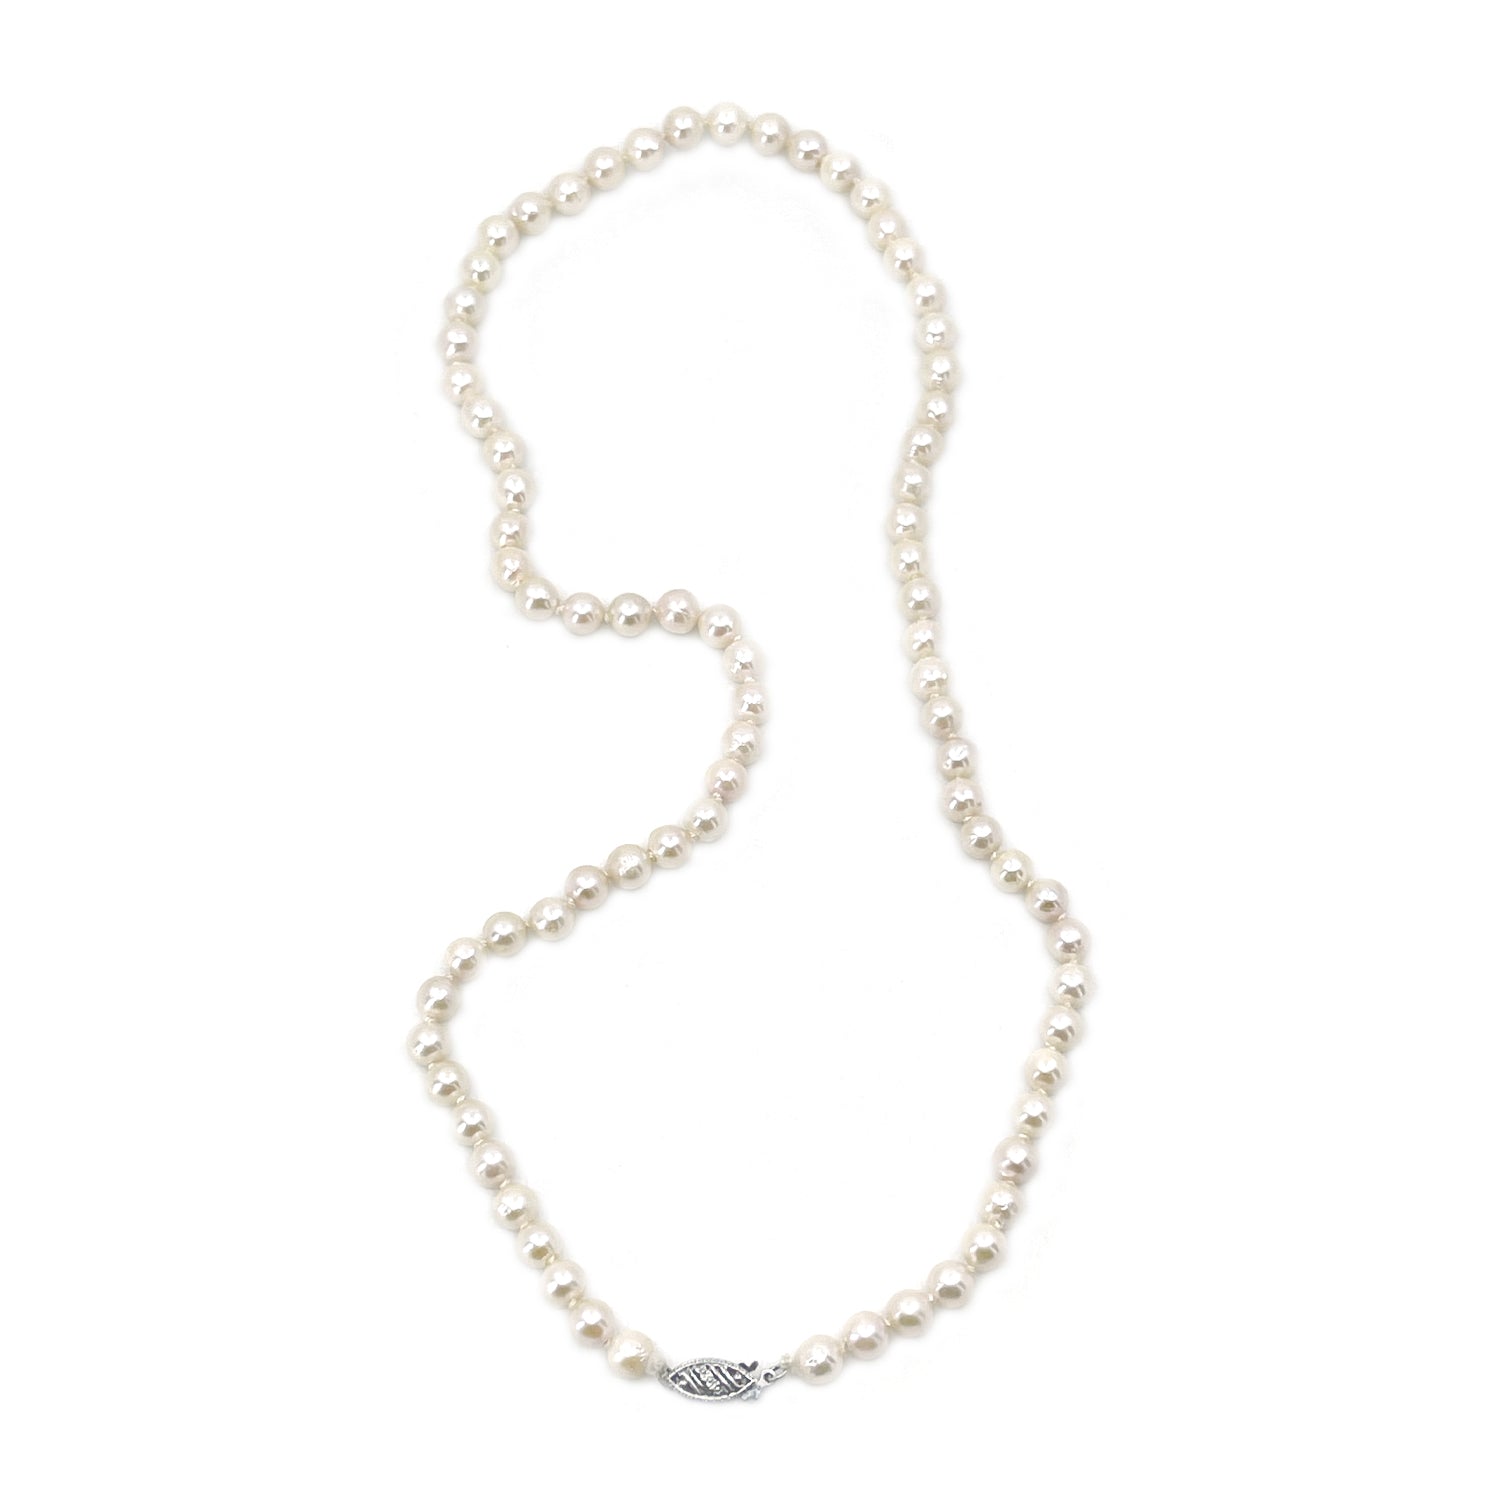 Retro Rosy Japanese Saltwater Cultured Akoya Pearl Necklace - 14K White Gold 19.50 Inch